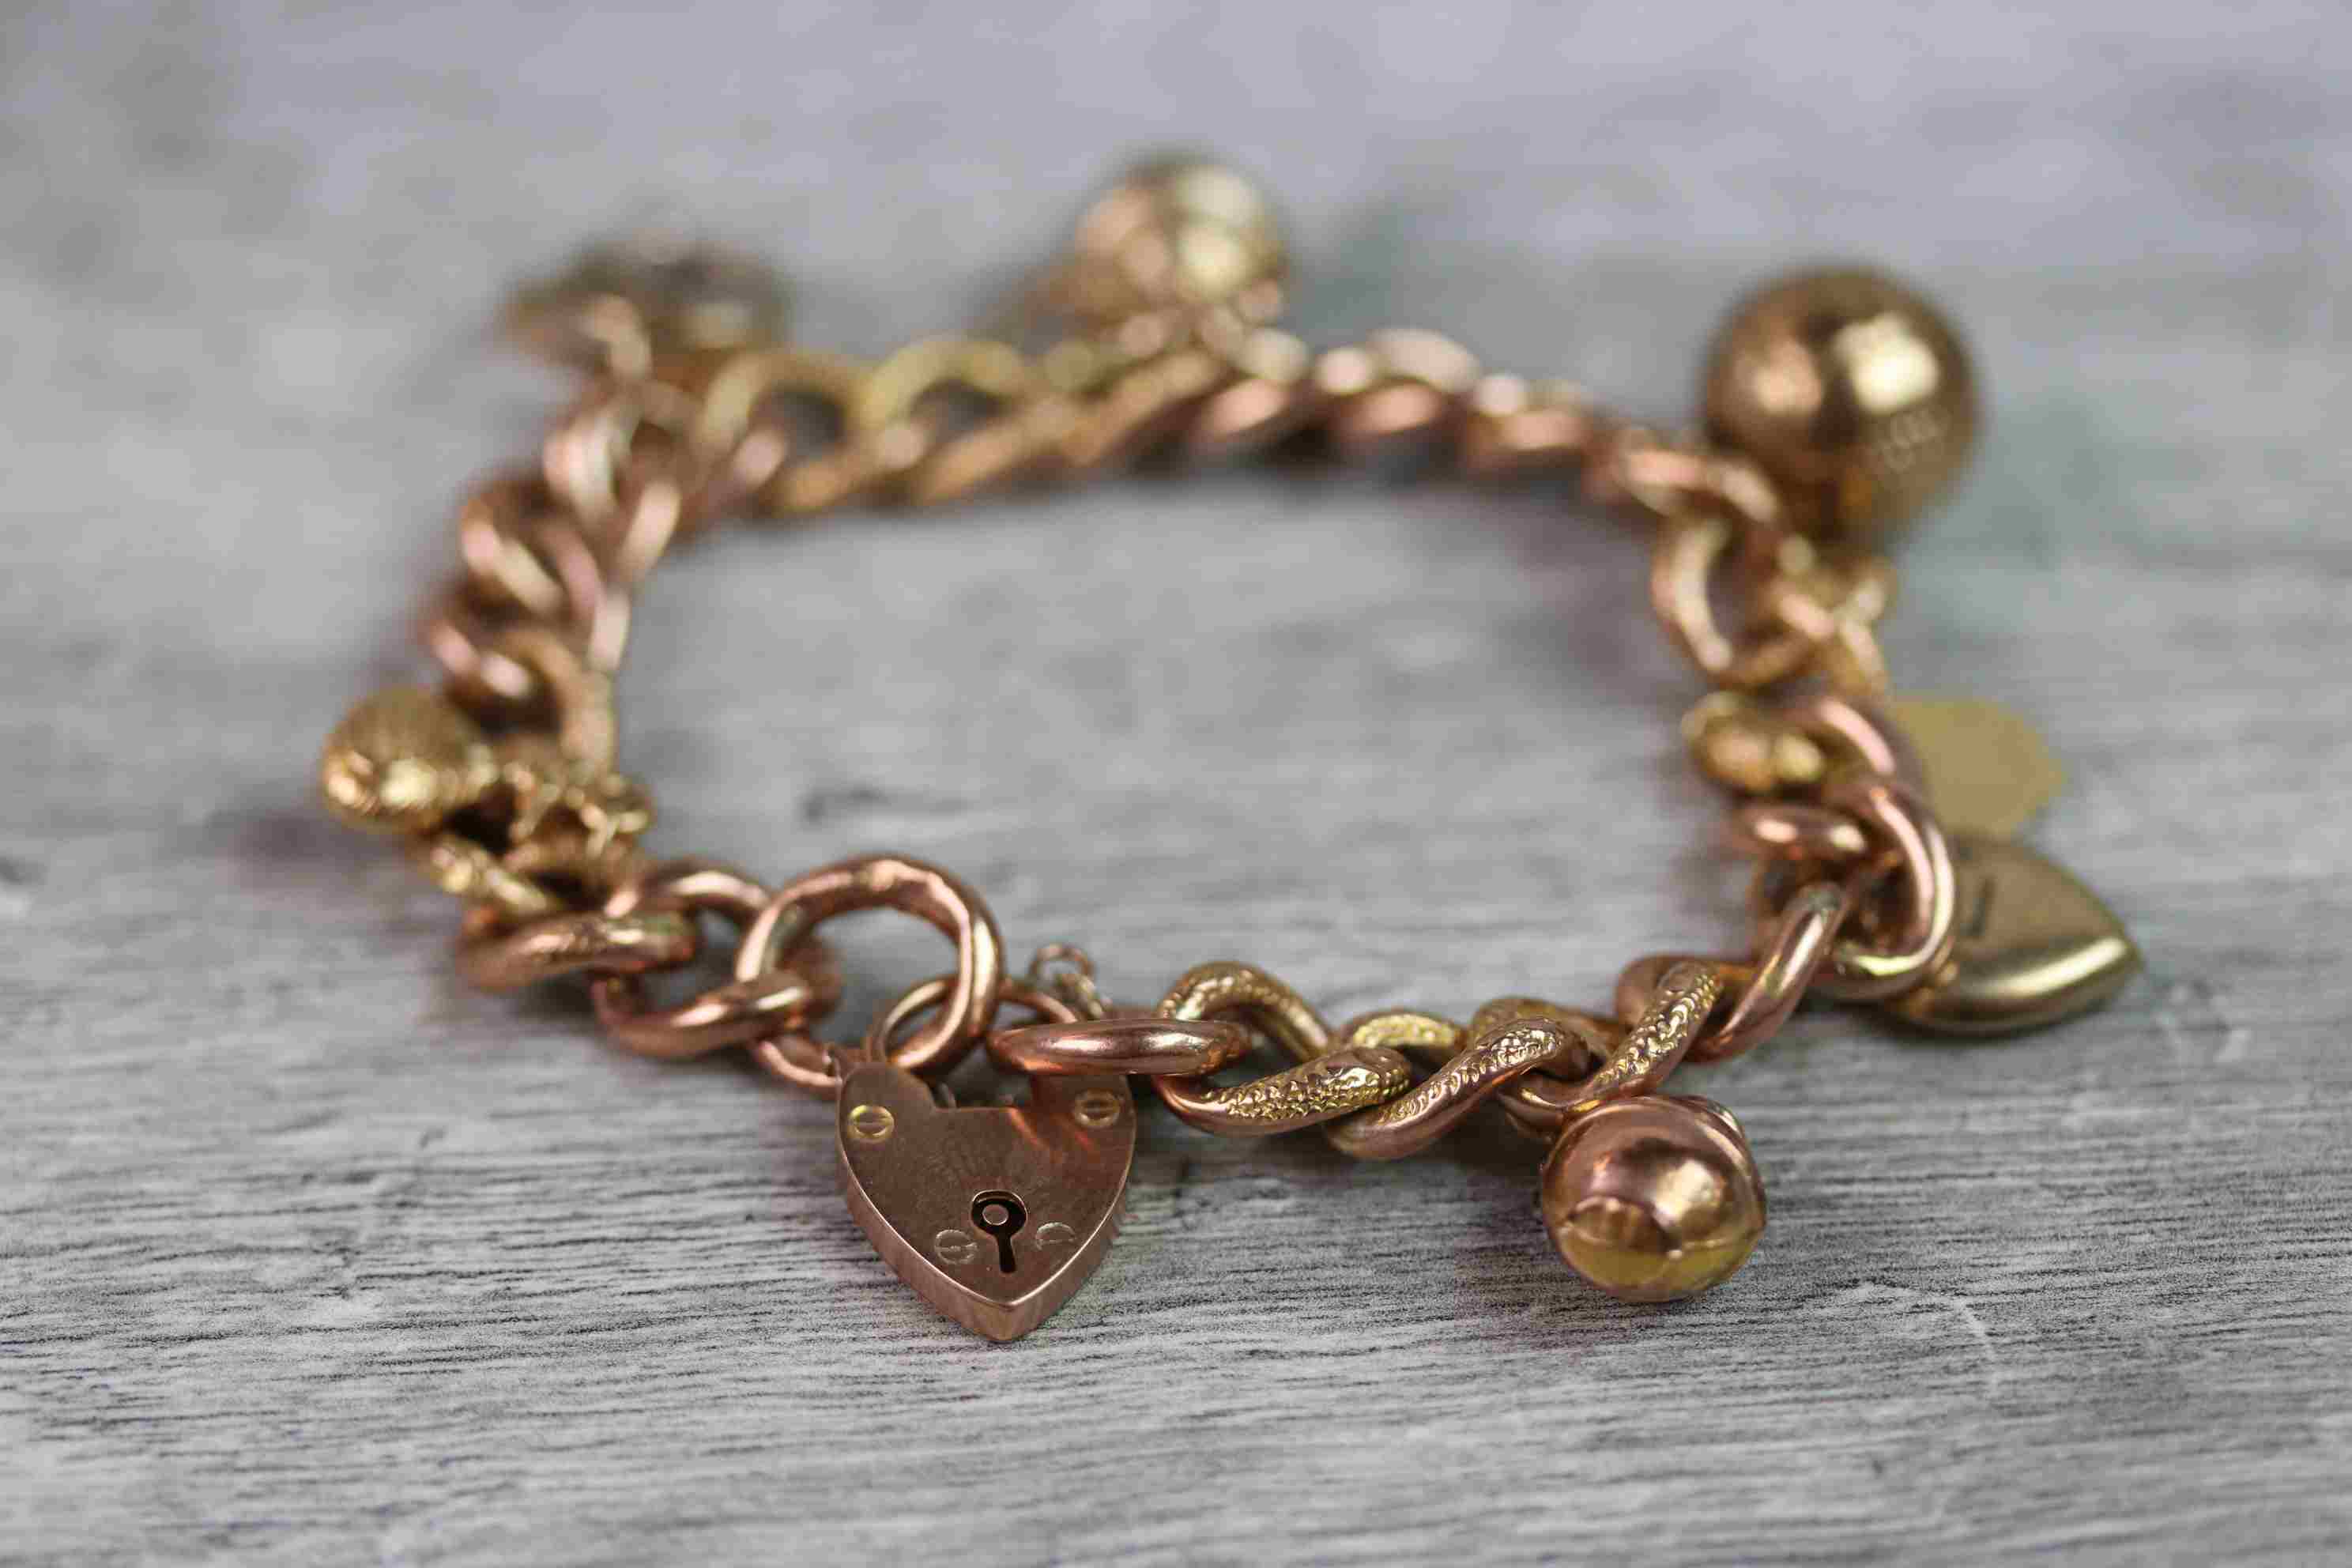 9ct rose gold curb link charm bracelet with 9ct rose gold padlock clasp, seven 9ct gold and yellow - Image 2 of 10